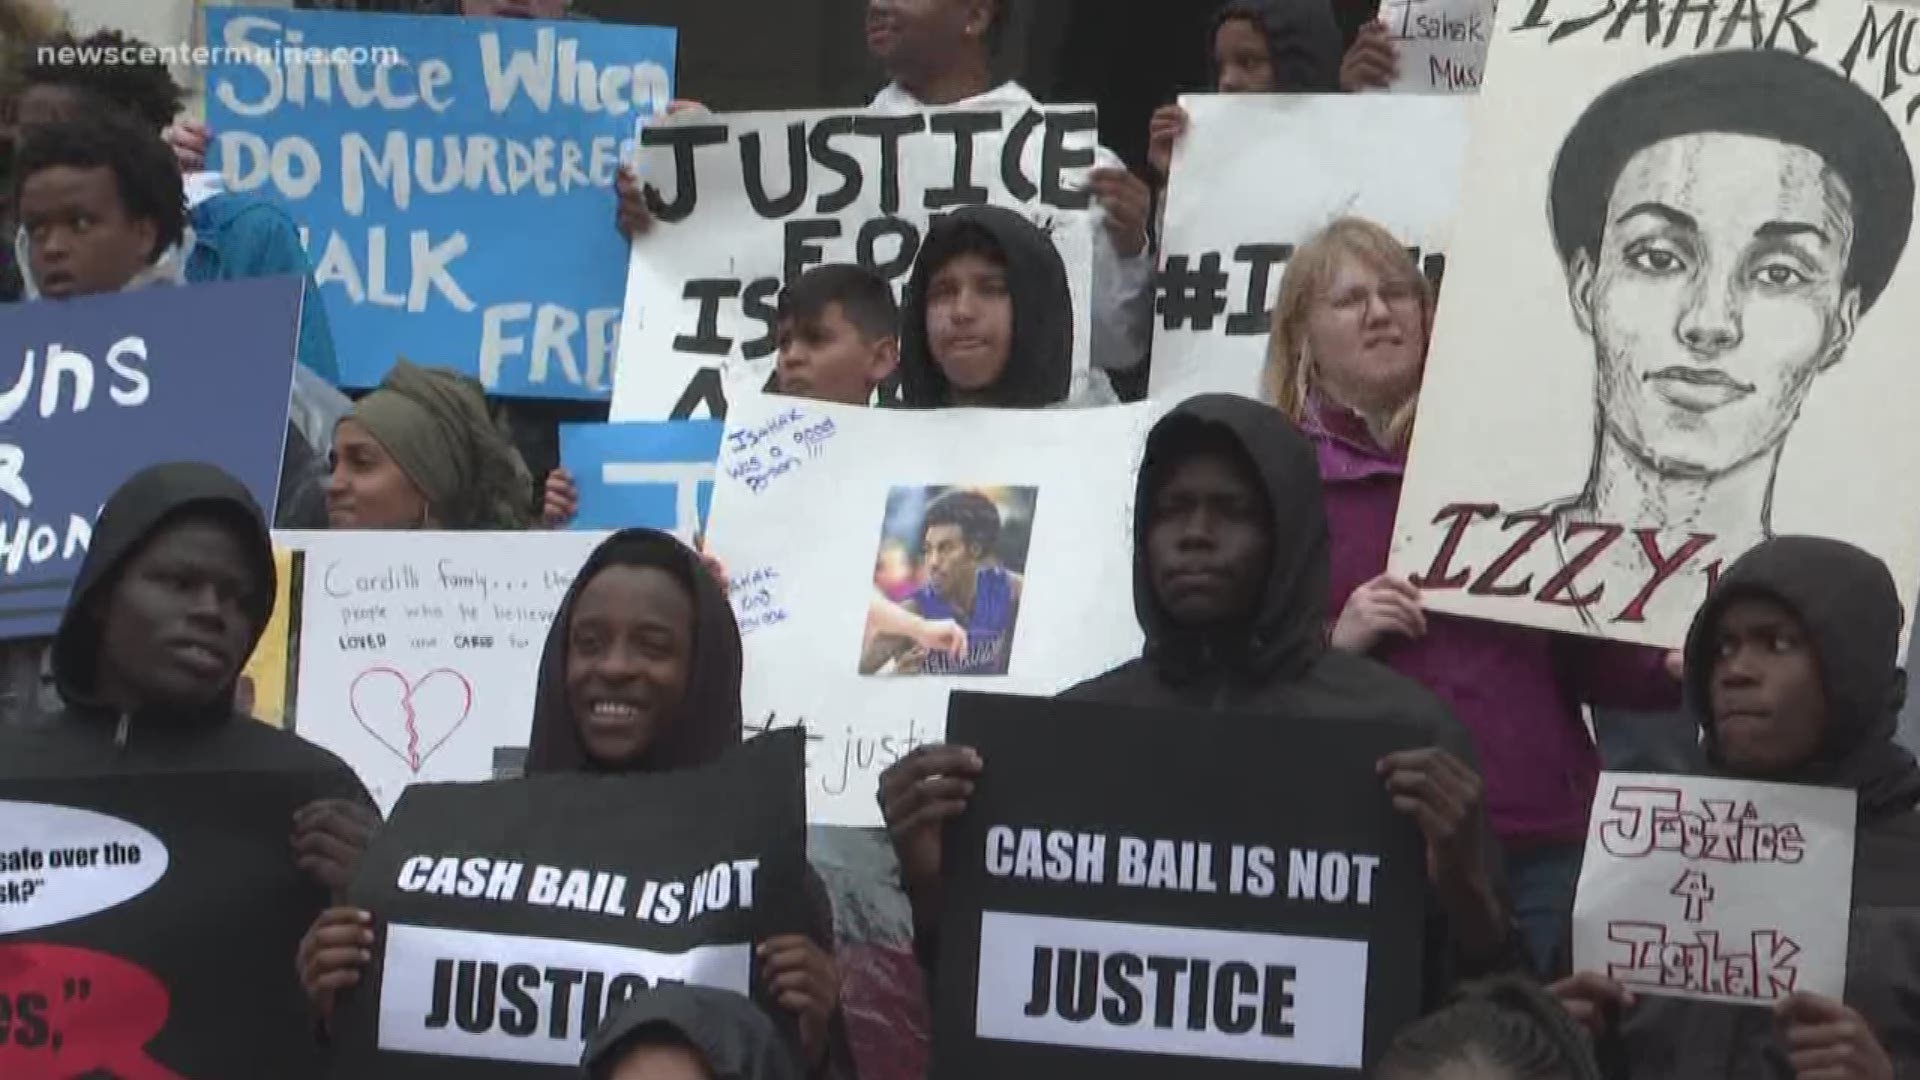 Hundreds of people took to the steps of Portland's City Hall Tuesday to rally for Isahak Muse.